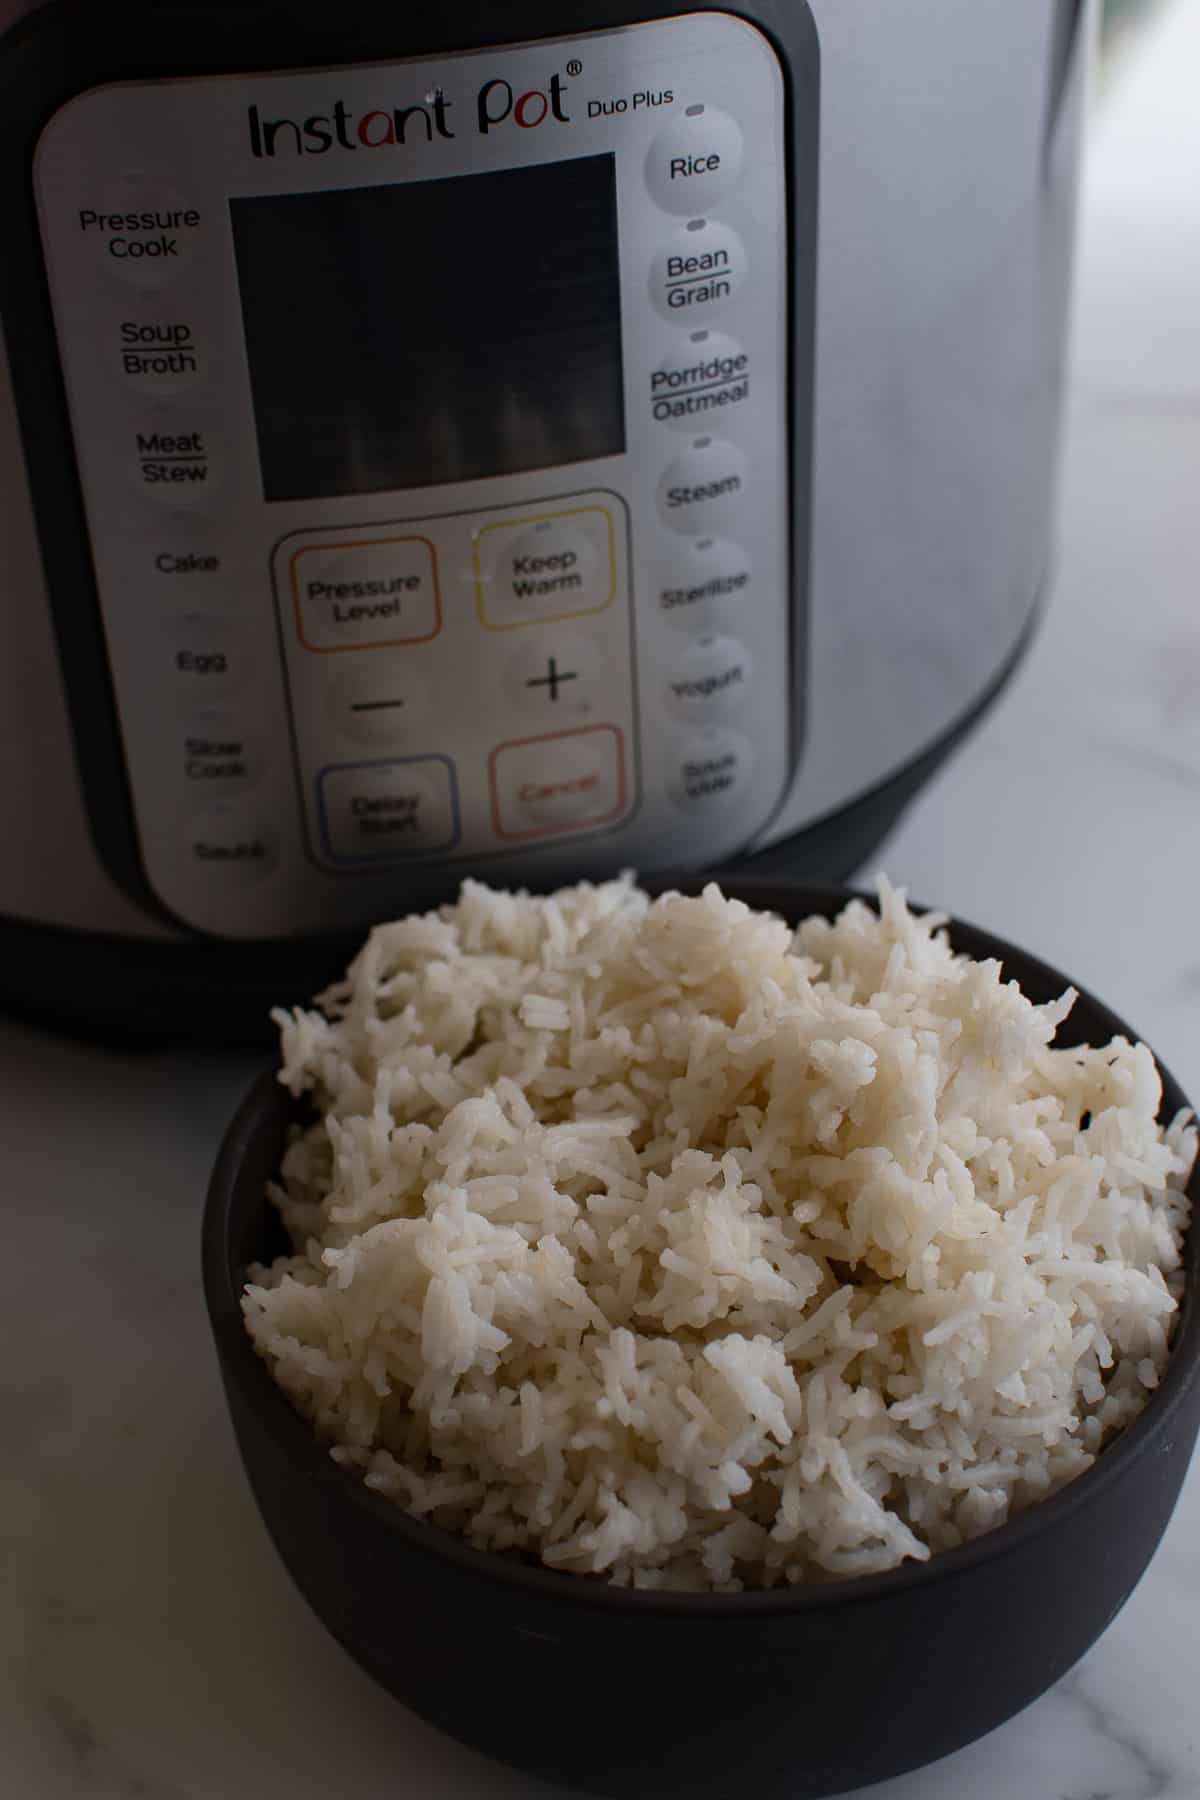 Rice with an instant pot in the background.